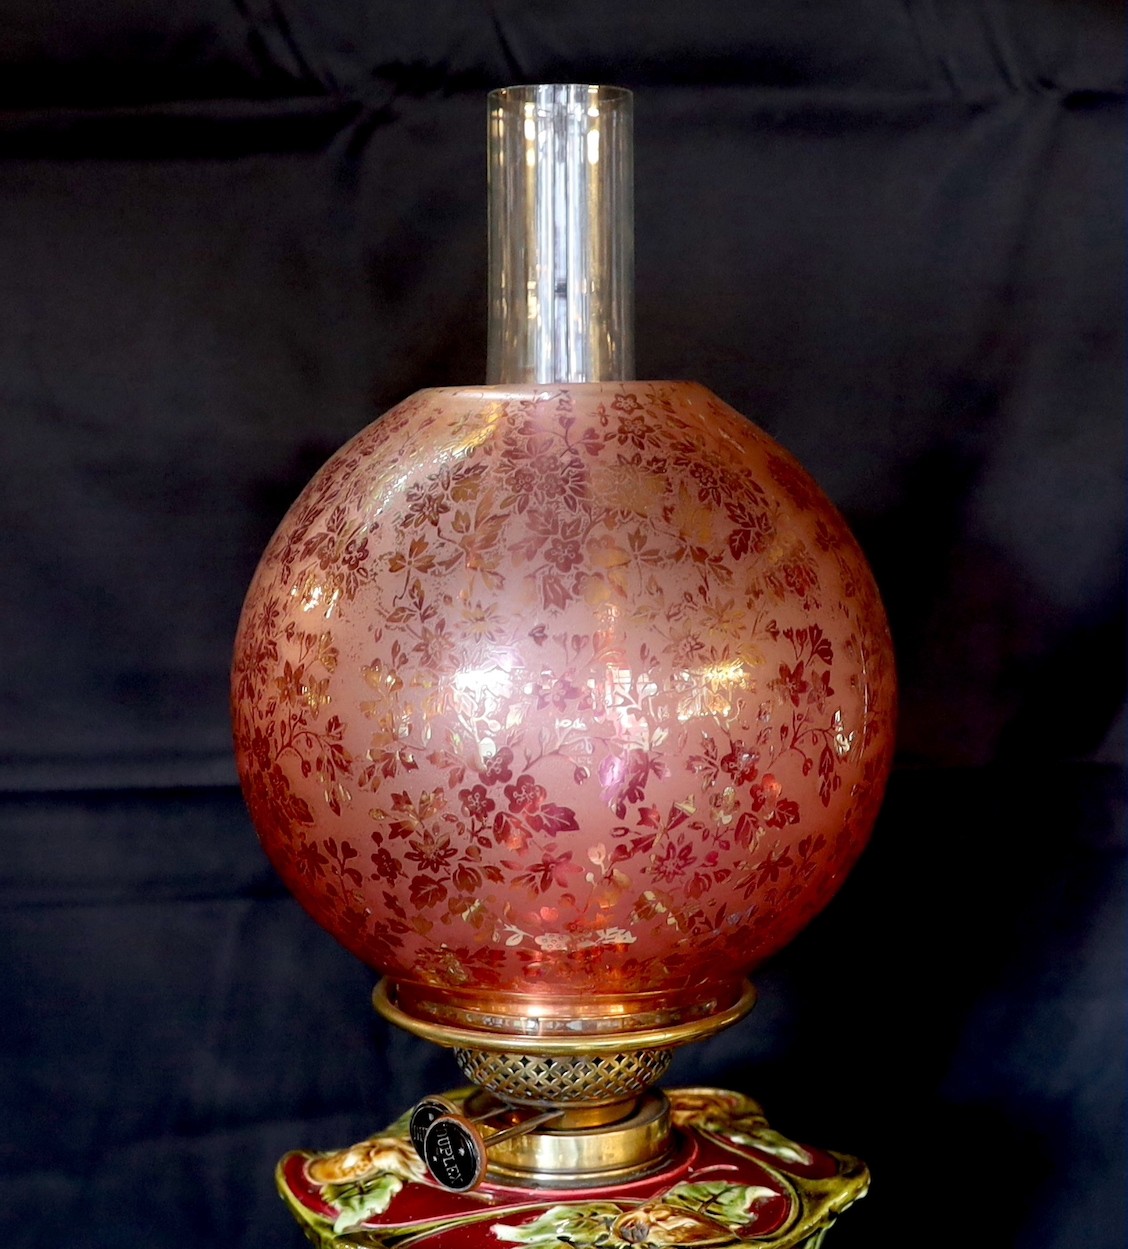 An Edwardian brass telescopic oil lamp standard, with later edged cranberry glass shade and duplex - Image 4 of 4